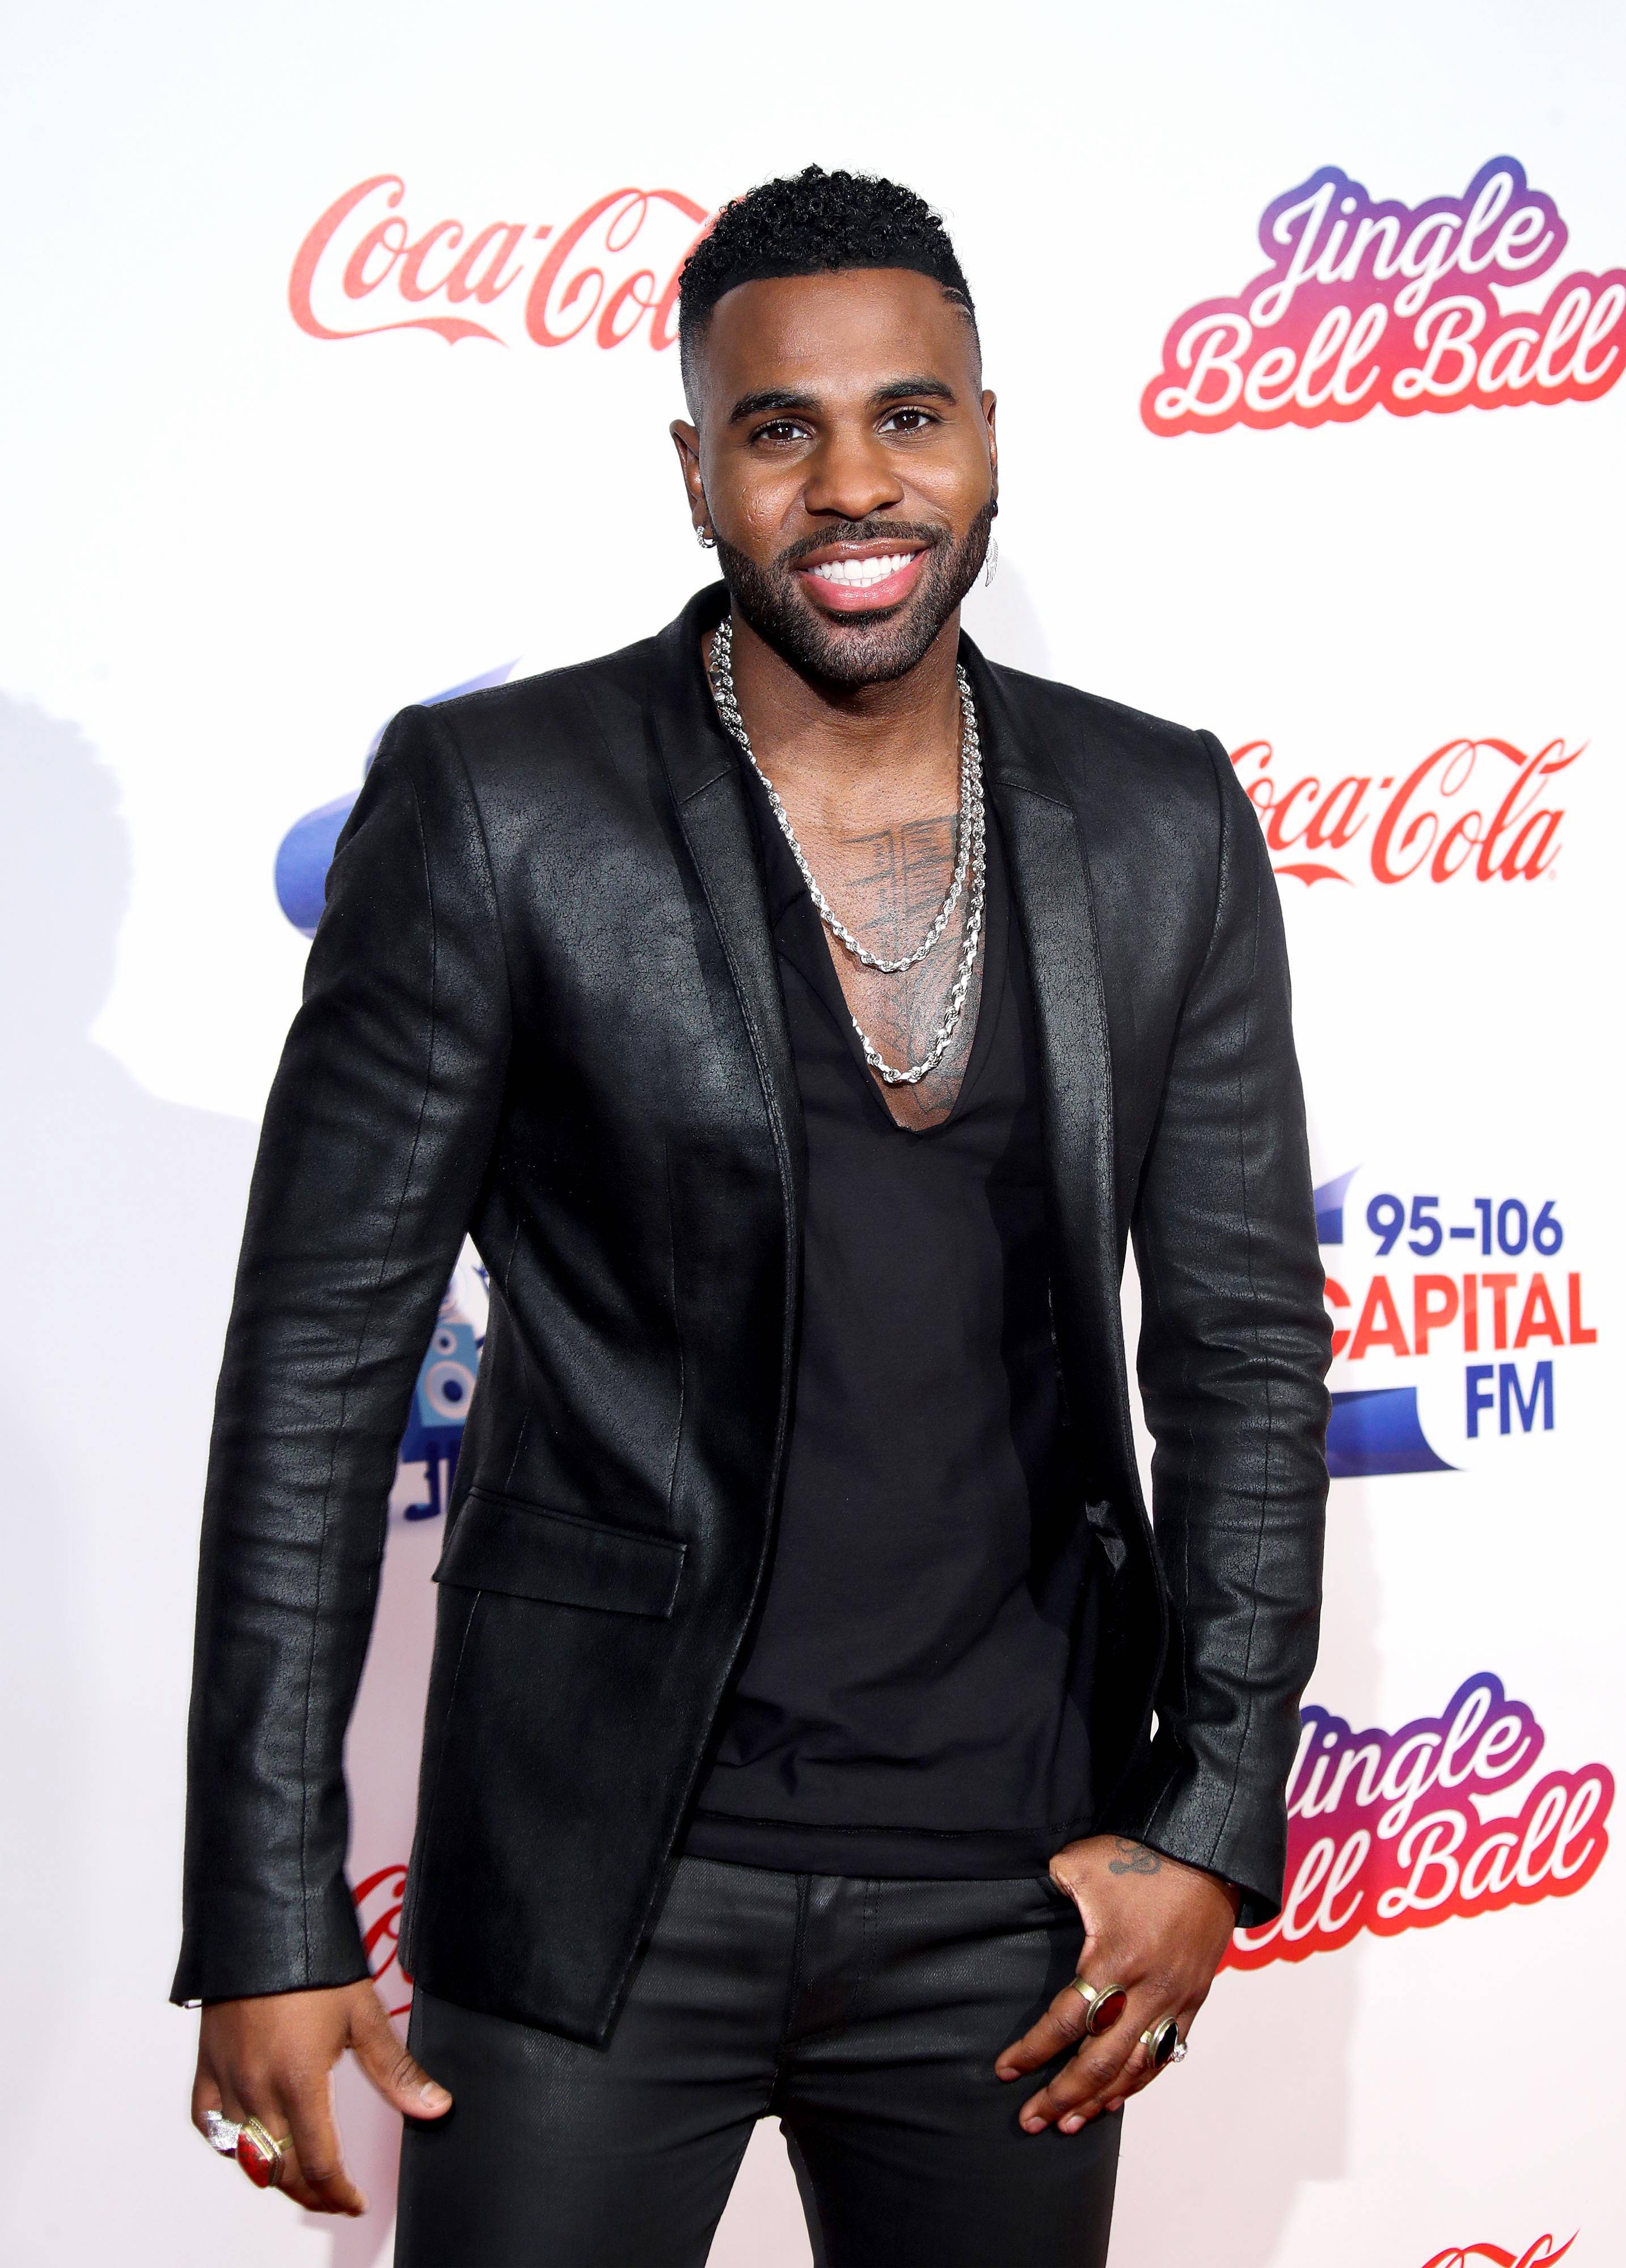 LONDON, ENGLAND - DECEMBER 09: Jason Derulo attends the Capital FM Jingle Bell Ball at The O2 Arena on December 09, 2018 in London, England. (Photo by Mike Marsland/Mike Marsland/WireImage)